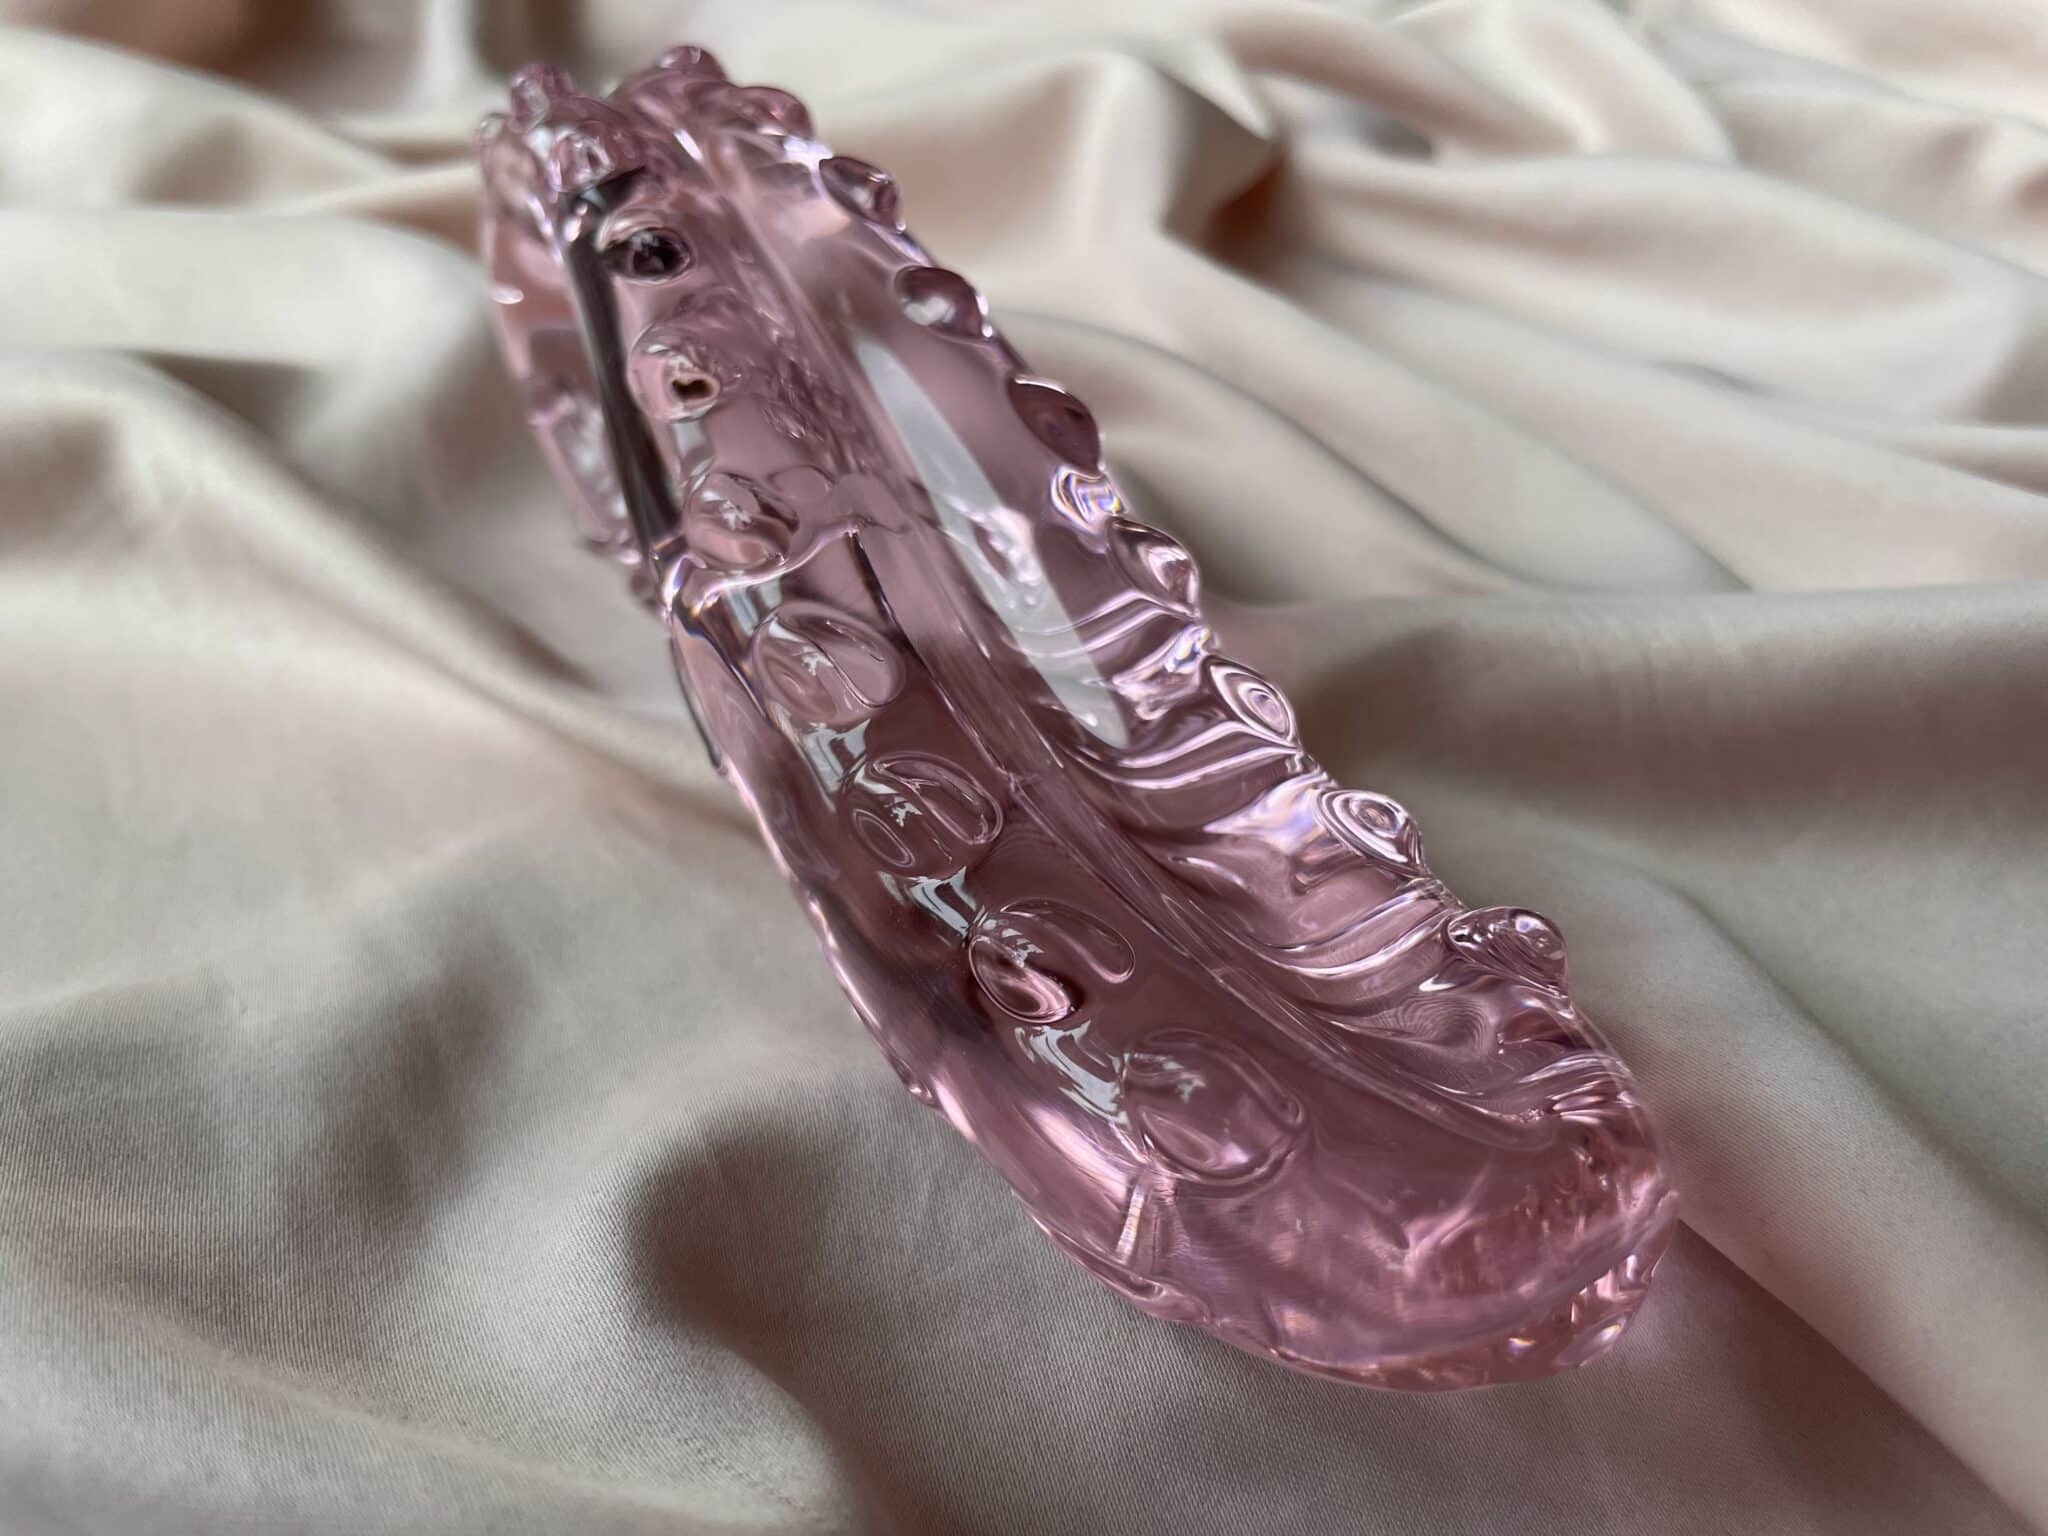 Icicles No. 24 Glass Tentacle Dildo Save or splurge: Looking at the price tag